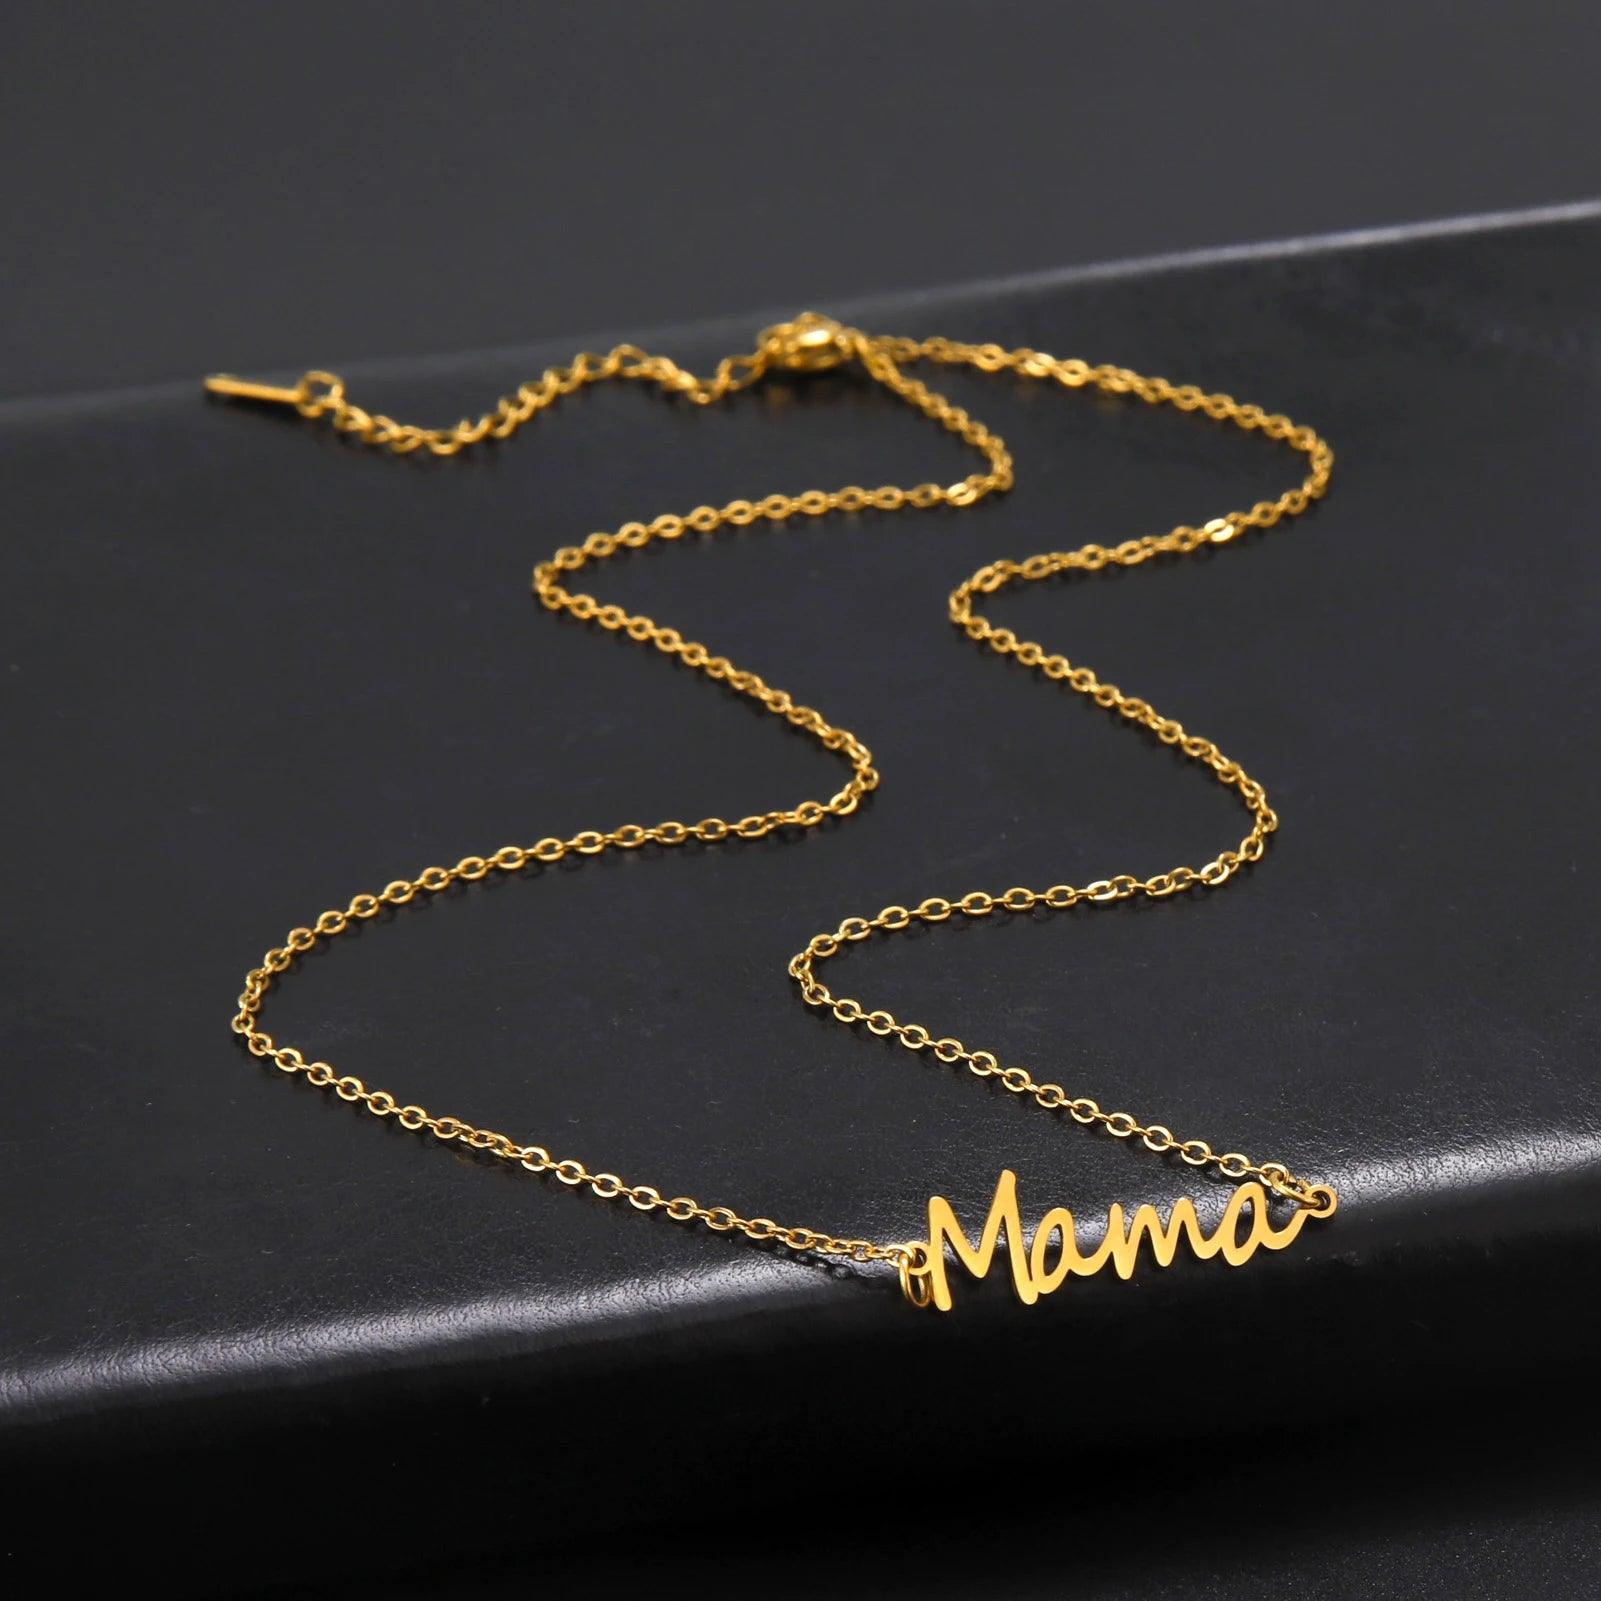 Trendy Stainless Steel "Mama" Pendant Necklace By Amexer - God's Girl Gifts And Apparel